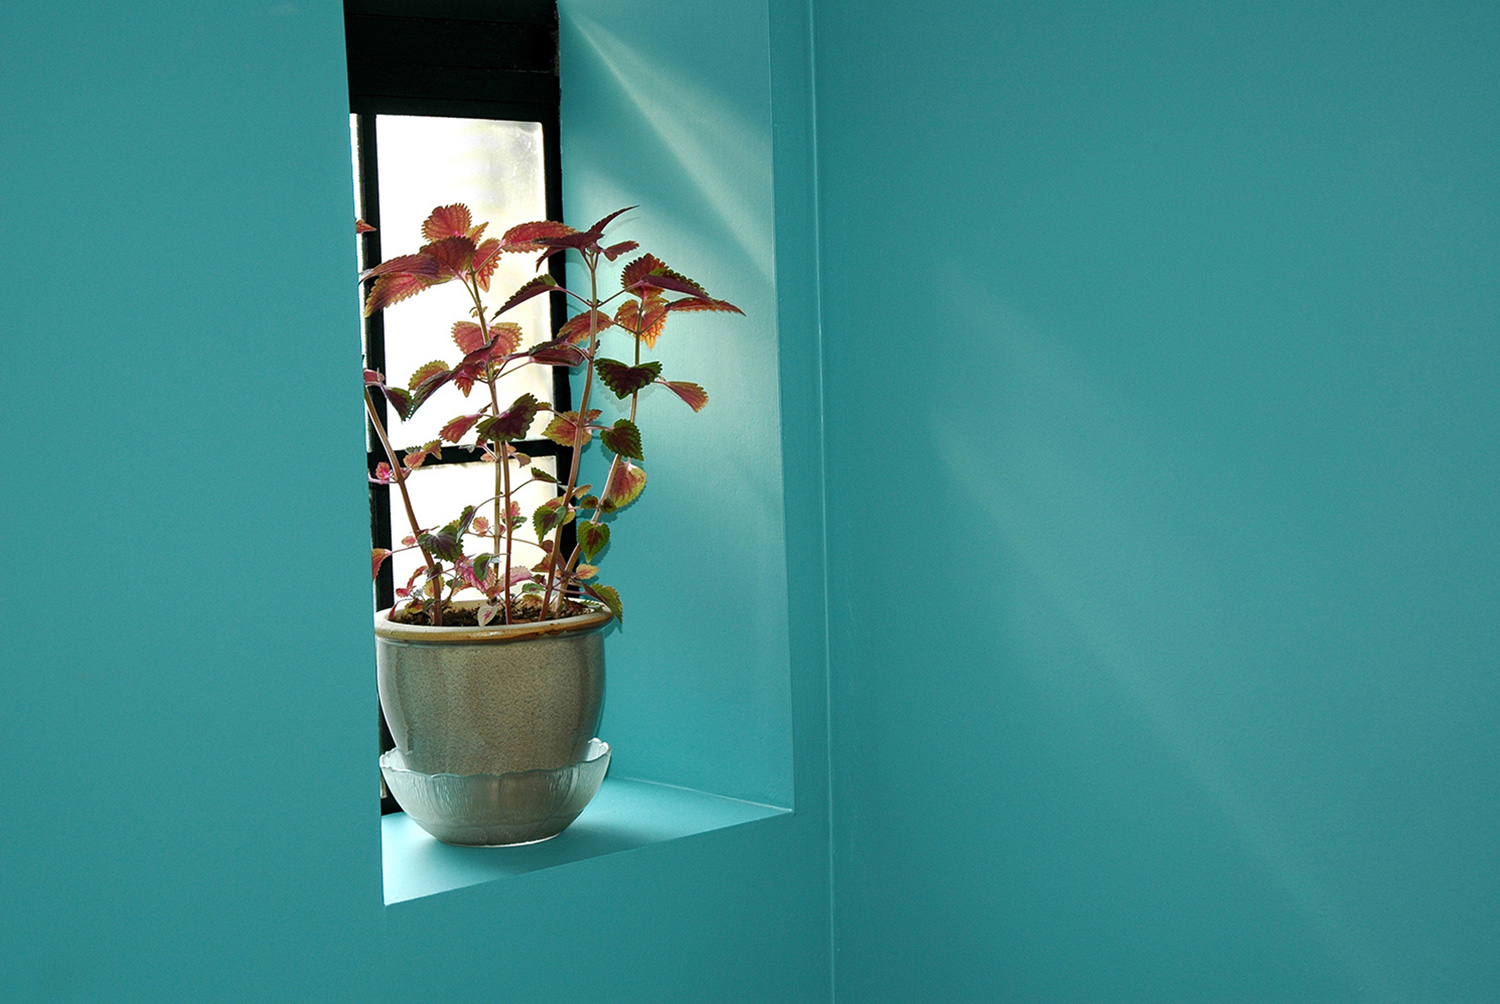 Decor_Potted_Plant_Window_Turquoise.jpg